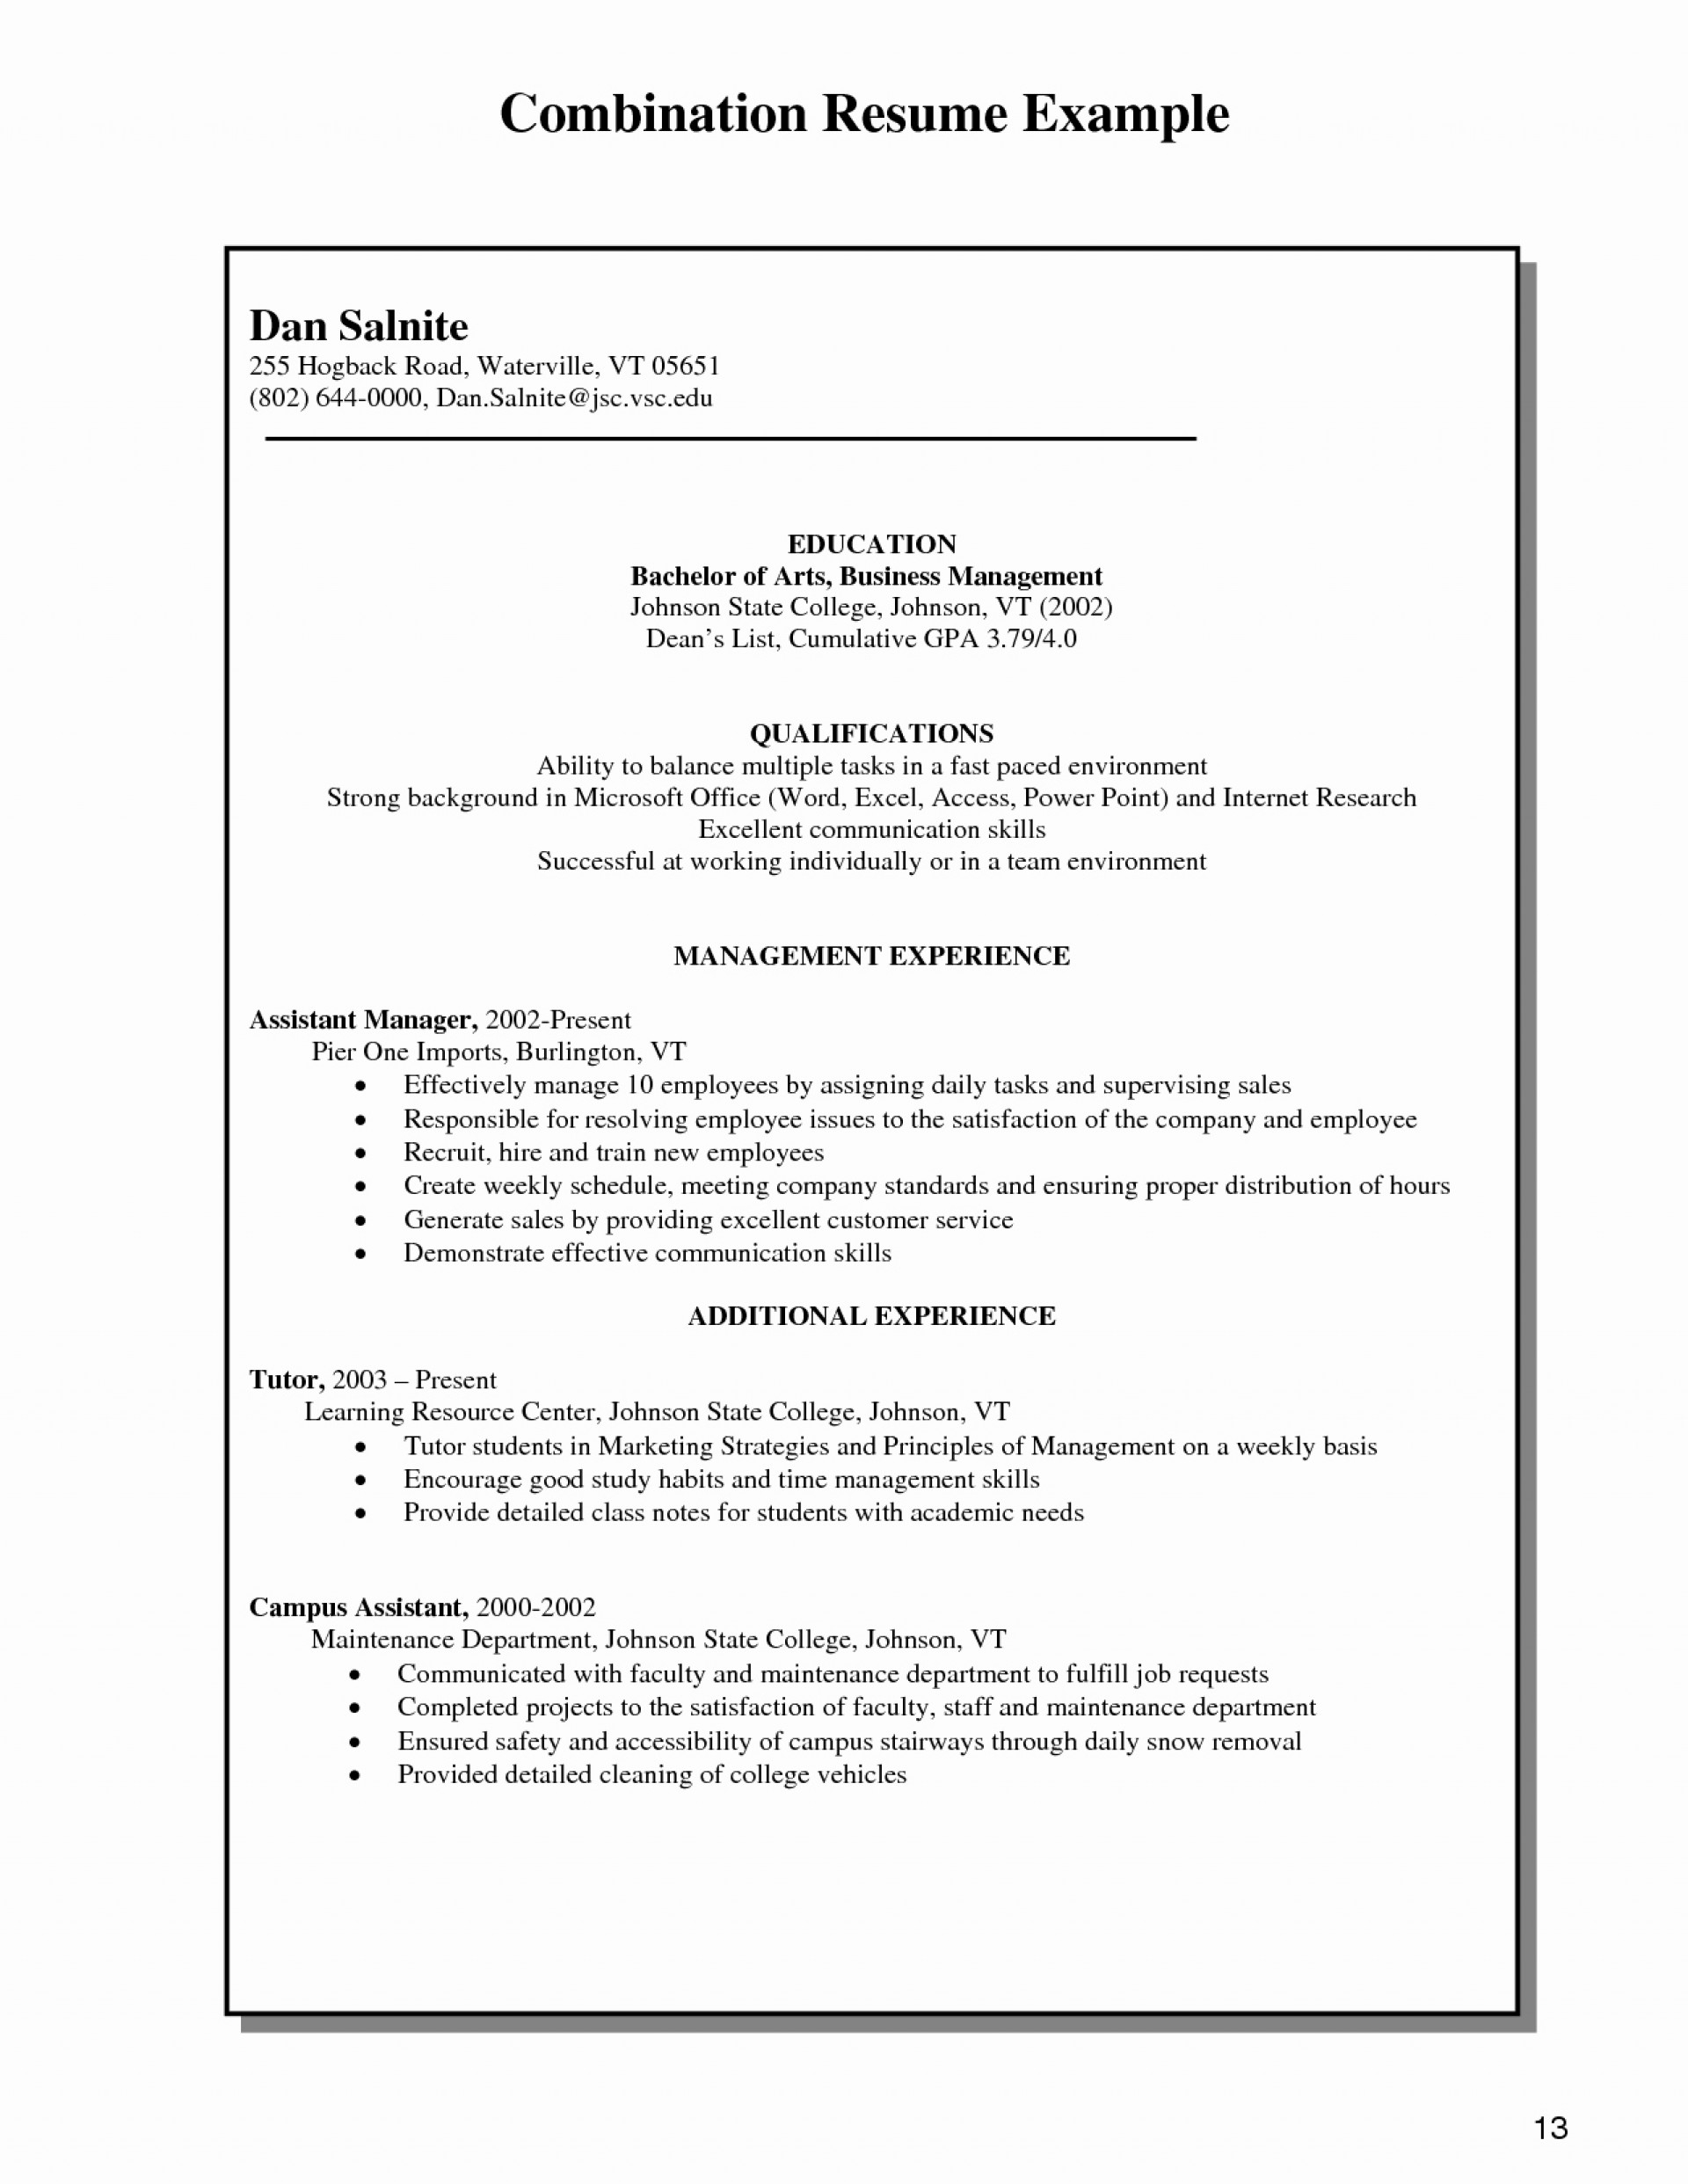 029 Combination Resume Template Word Free Templates 27 1 Inside Combination Resume Template Word